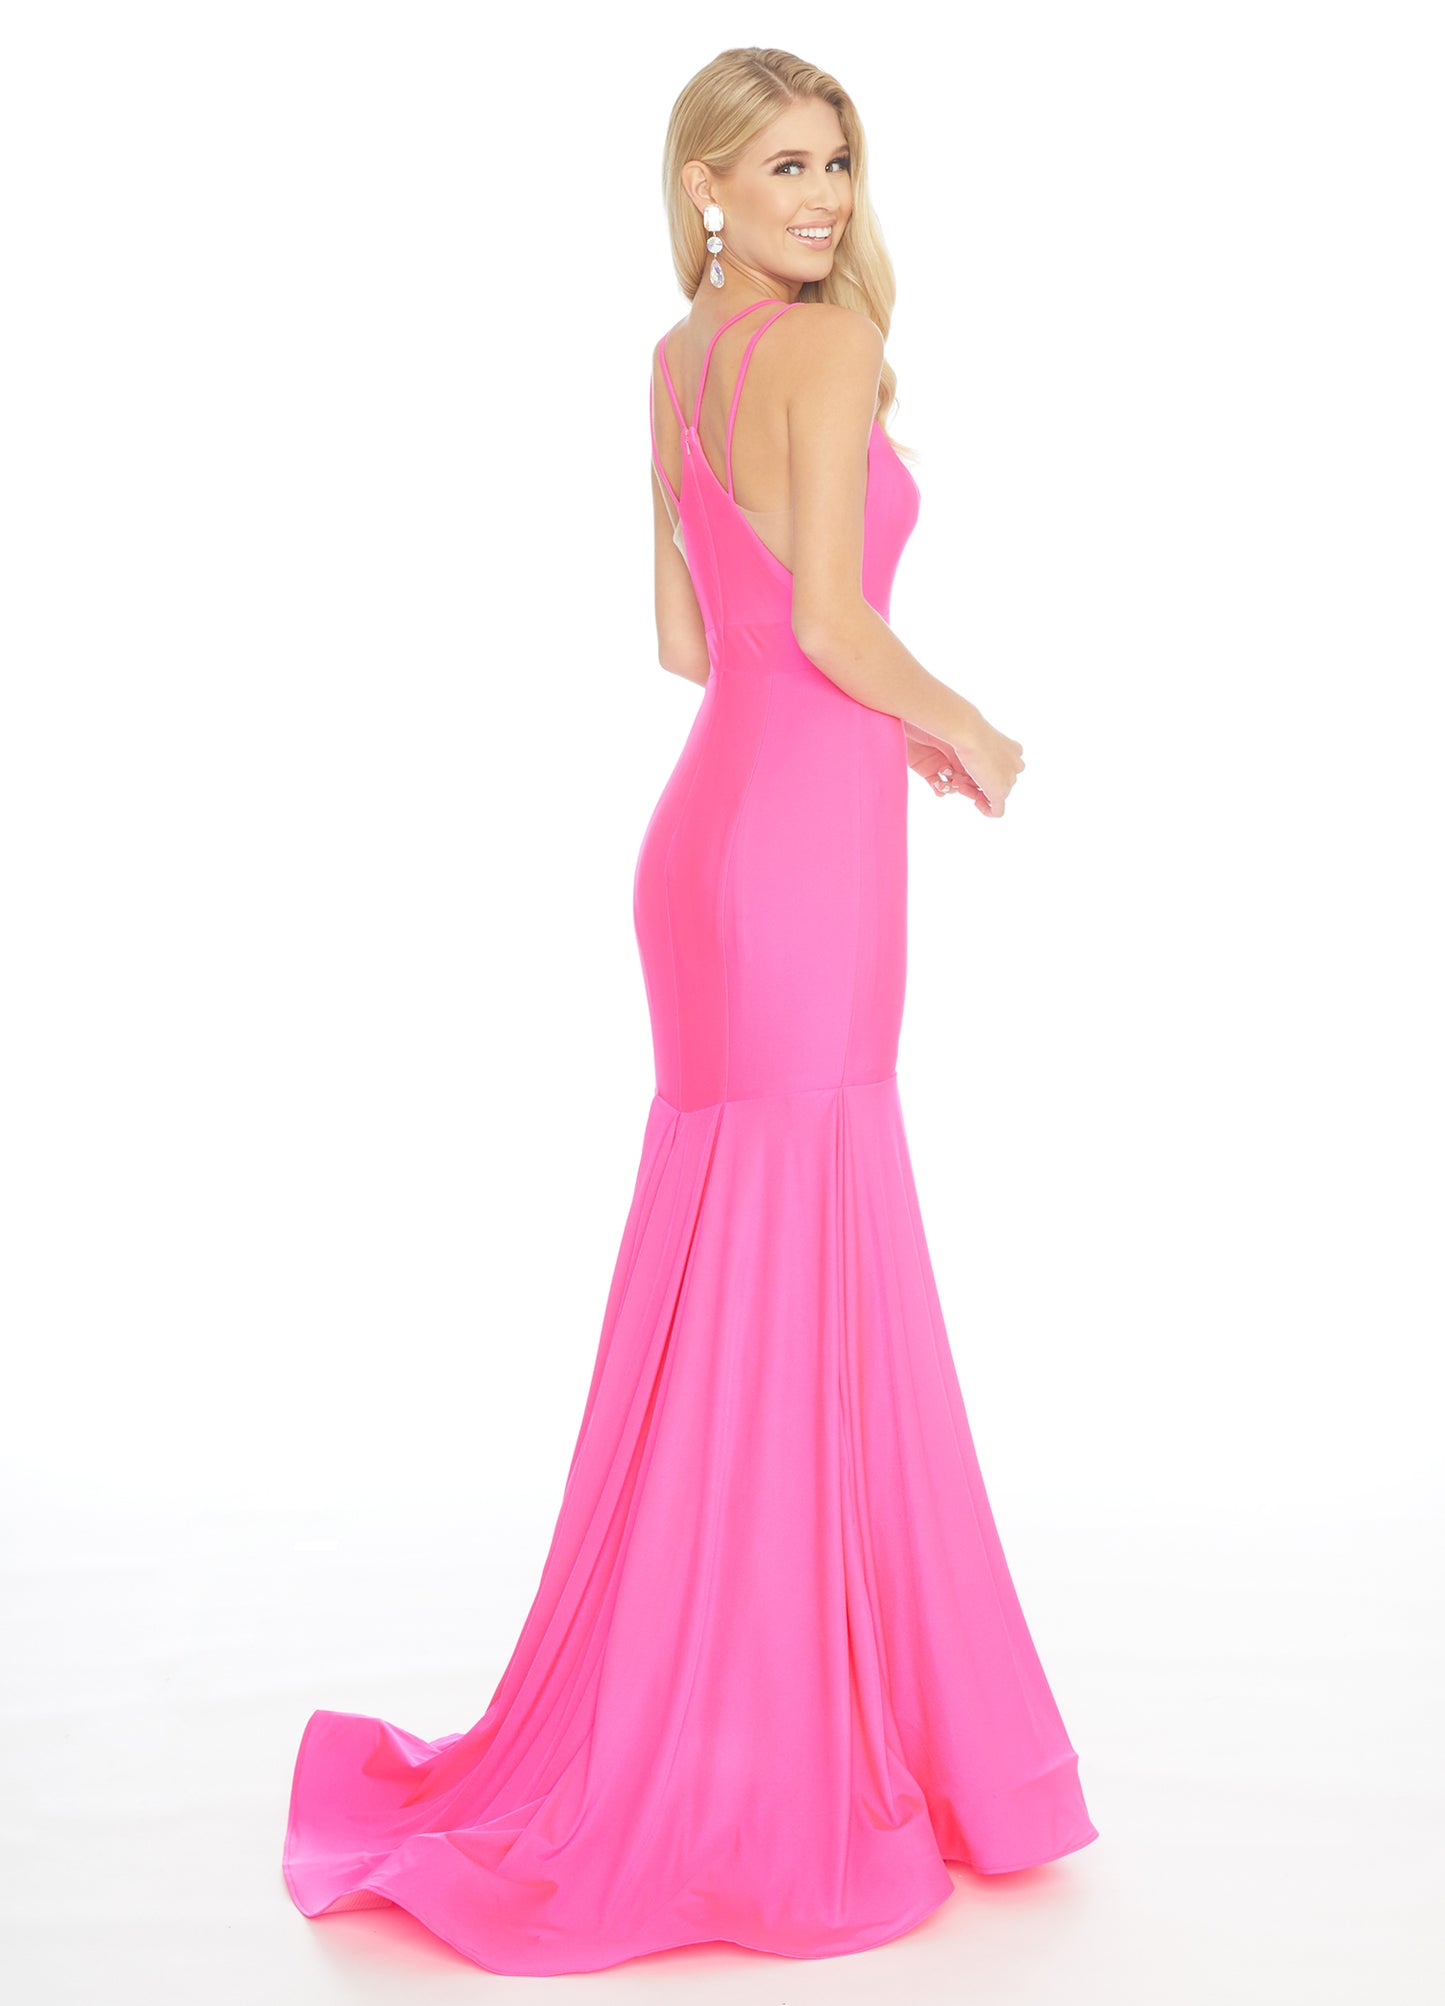 Ashley Lauren 1870 This stunning fit & flare evening gown is sure to turn heads! The bustier is has a v-neckline complete with double spaghetti straps and illusion panel sides. The skirt embellished with box-pleats and sweeping train. Racer Back Jersey  Available Sizes: 12  Available Colors: Hot Pink